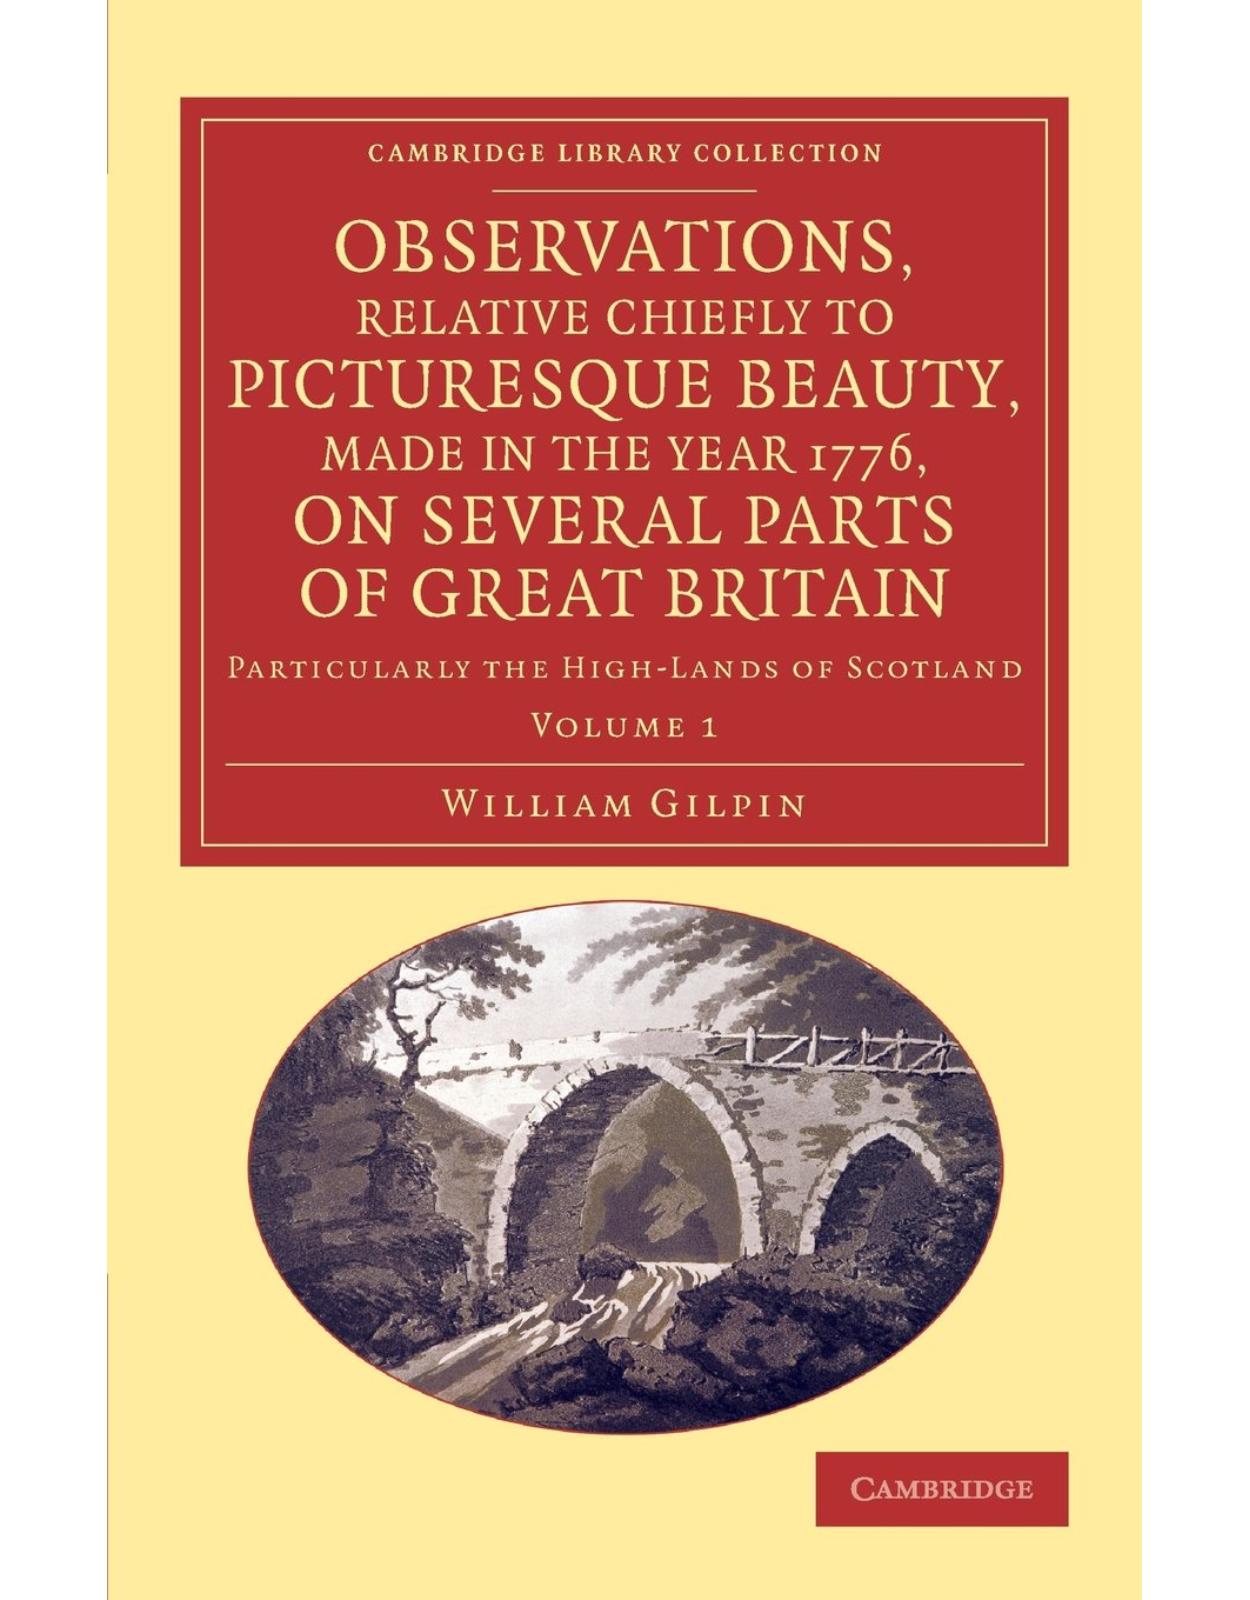 Observations, Relative Chiefly to Picturesque Beauty, Made in the Year 1776, on Several Parts of Great Britain 2 Volume Set: Particularly the High-Lands of Scotland